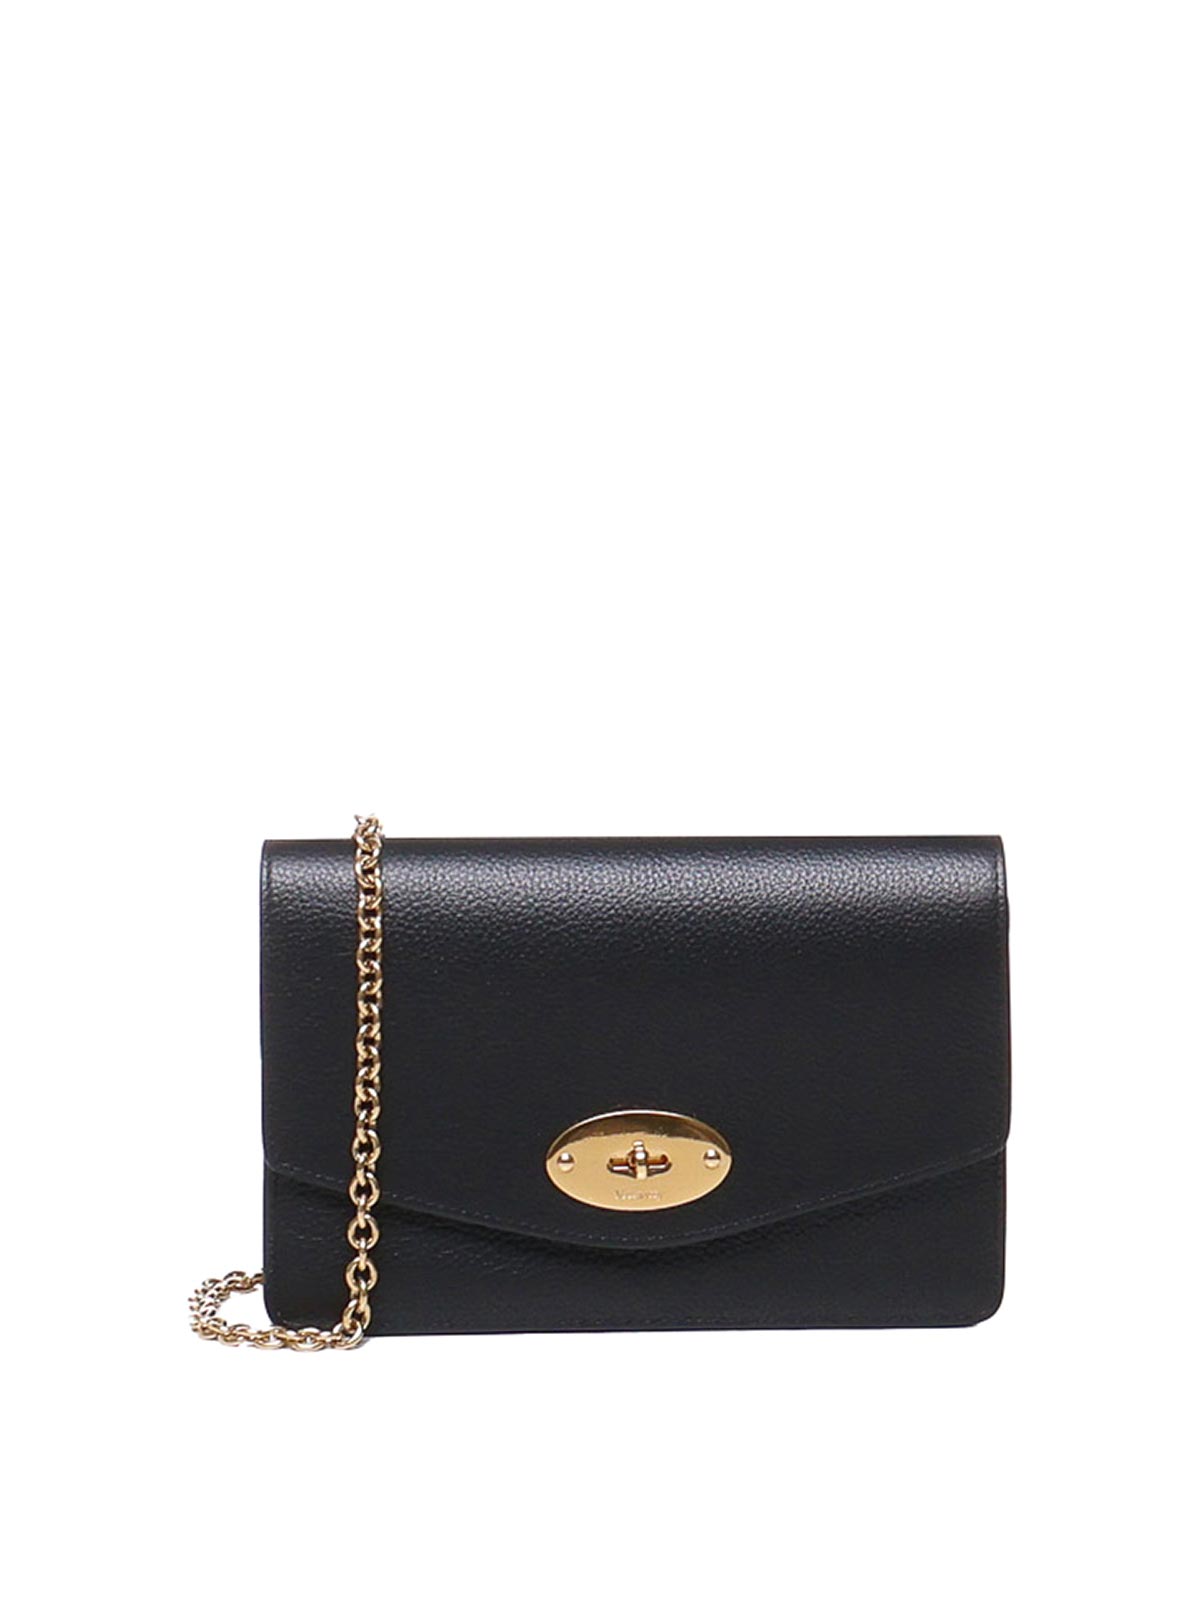 Mulberry Bag With Chain Shoulder Strap In Black